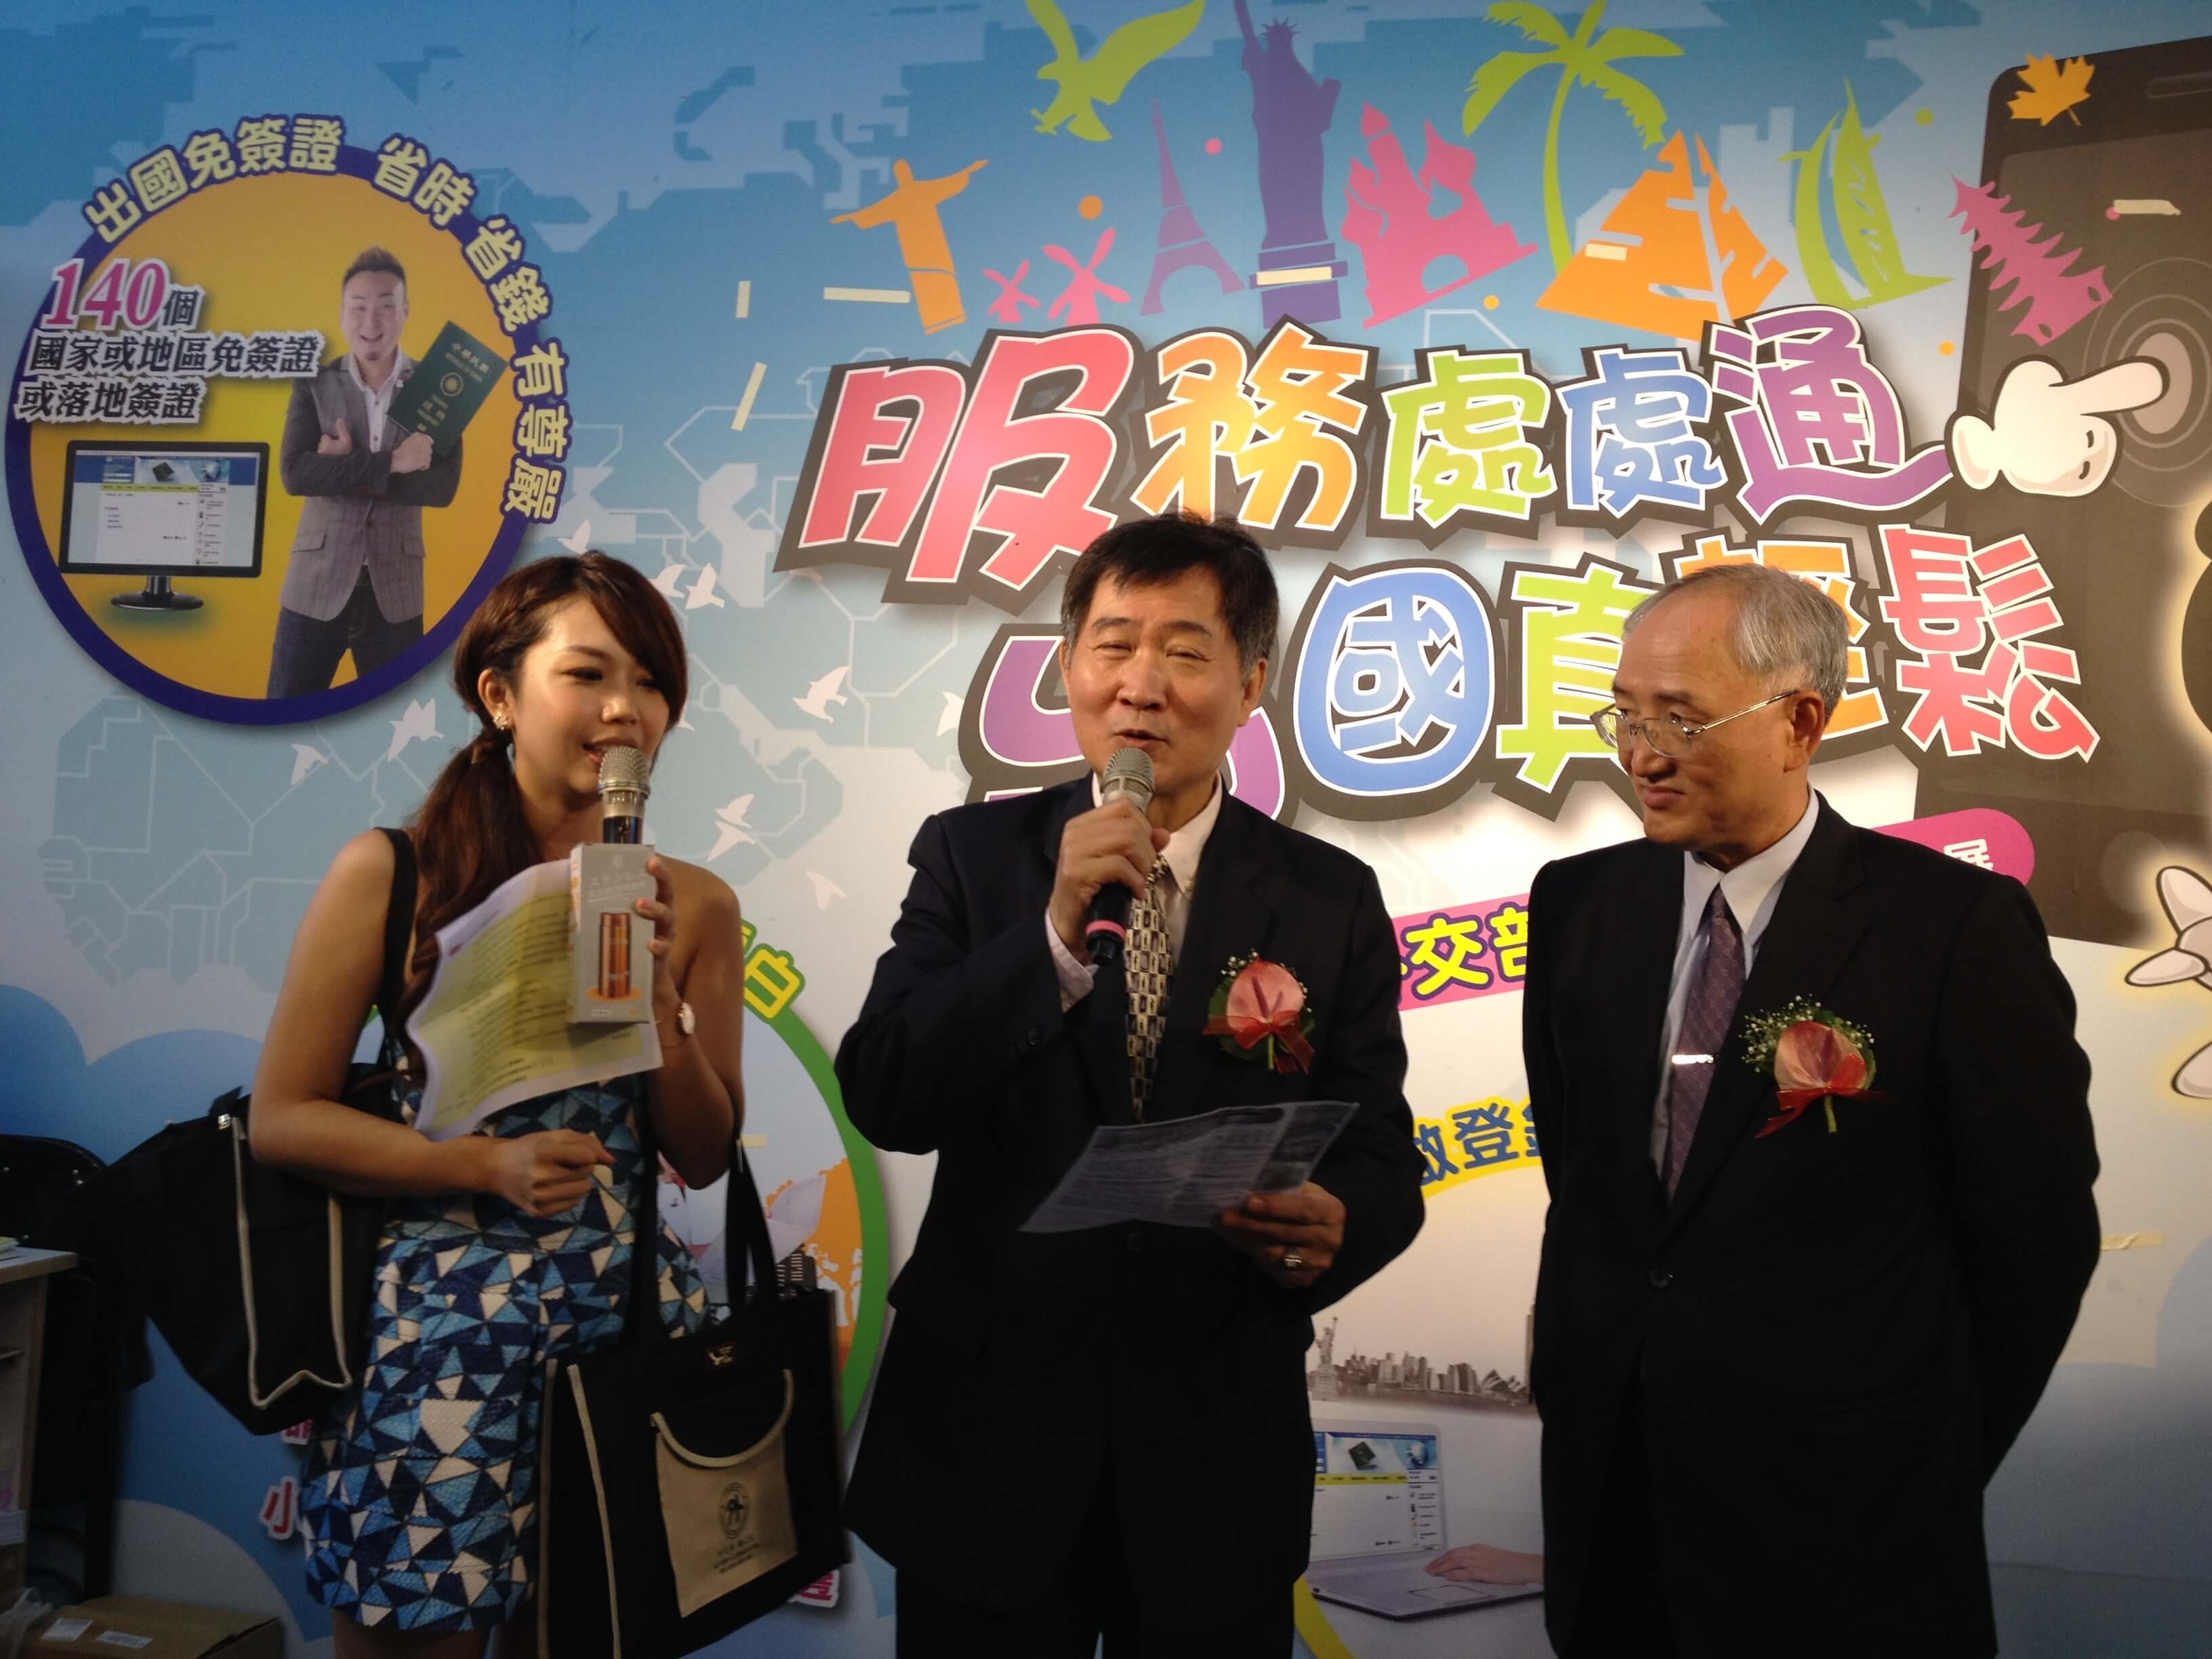 Central Taiwan Office, MOFA Participated in the Taichung International Travel Fair from October 3-6, 2014